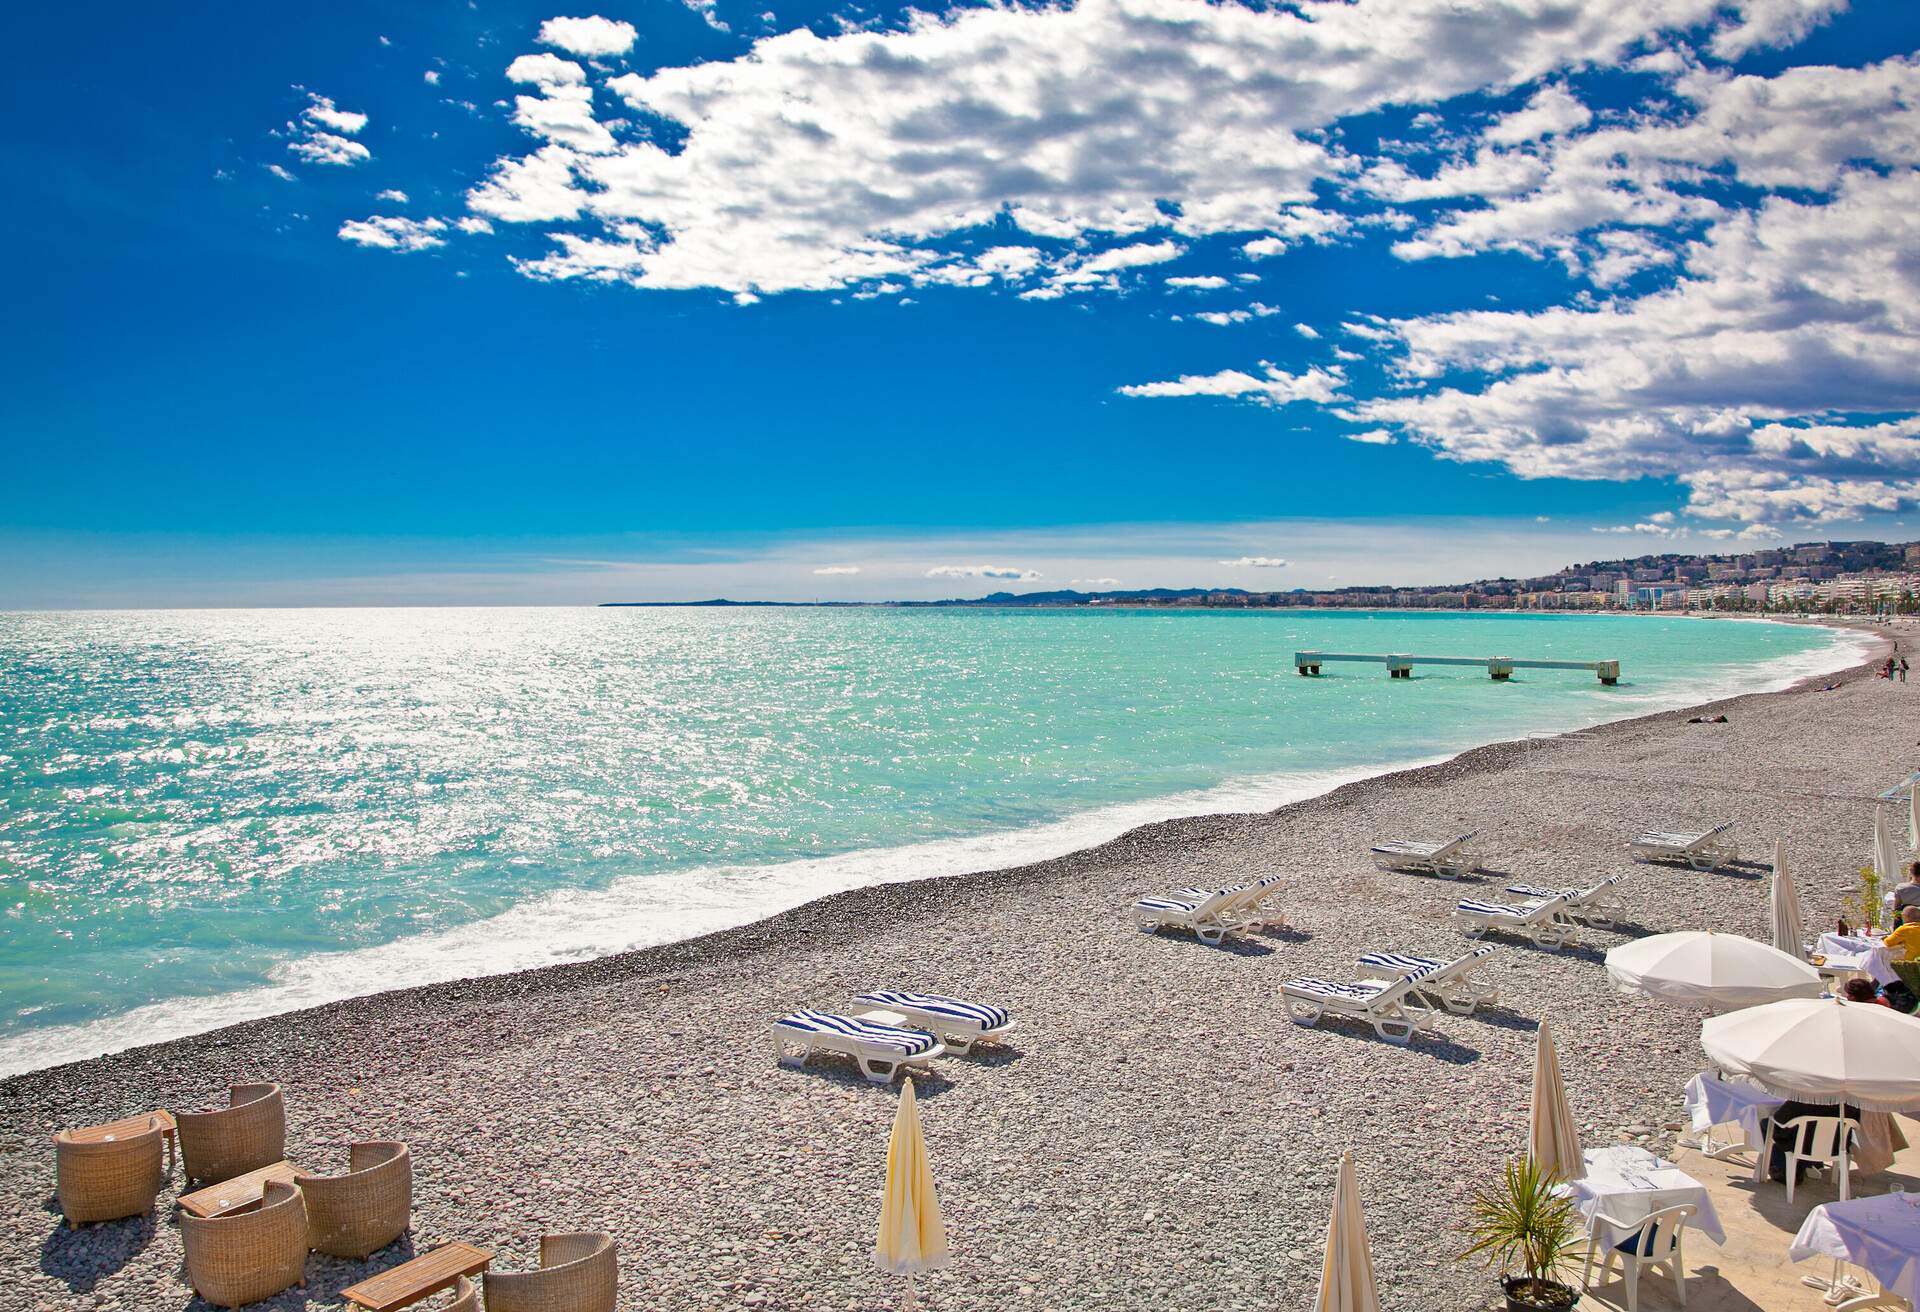 View of the beach in Nice, near the Promenade des Anglais, on summer hot day, France.; Shutterstock ID 185561138; Purpose: Newsletter; Brand (KAYAK, Momondo, Any): Any